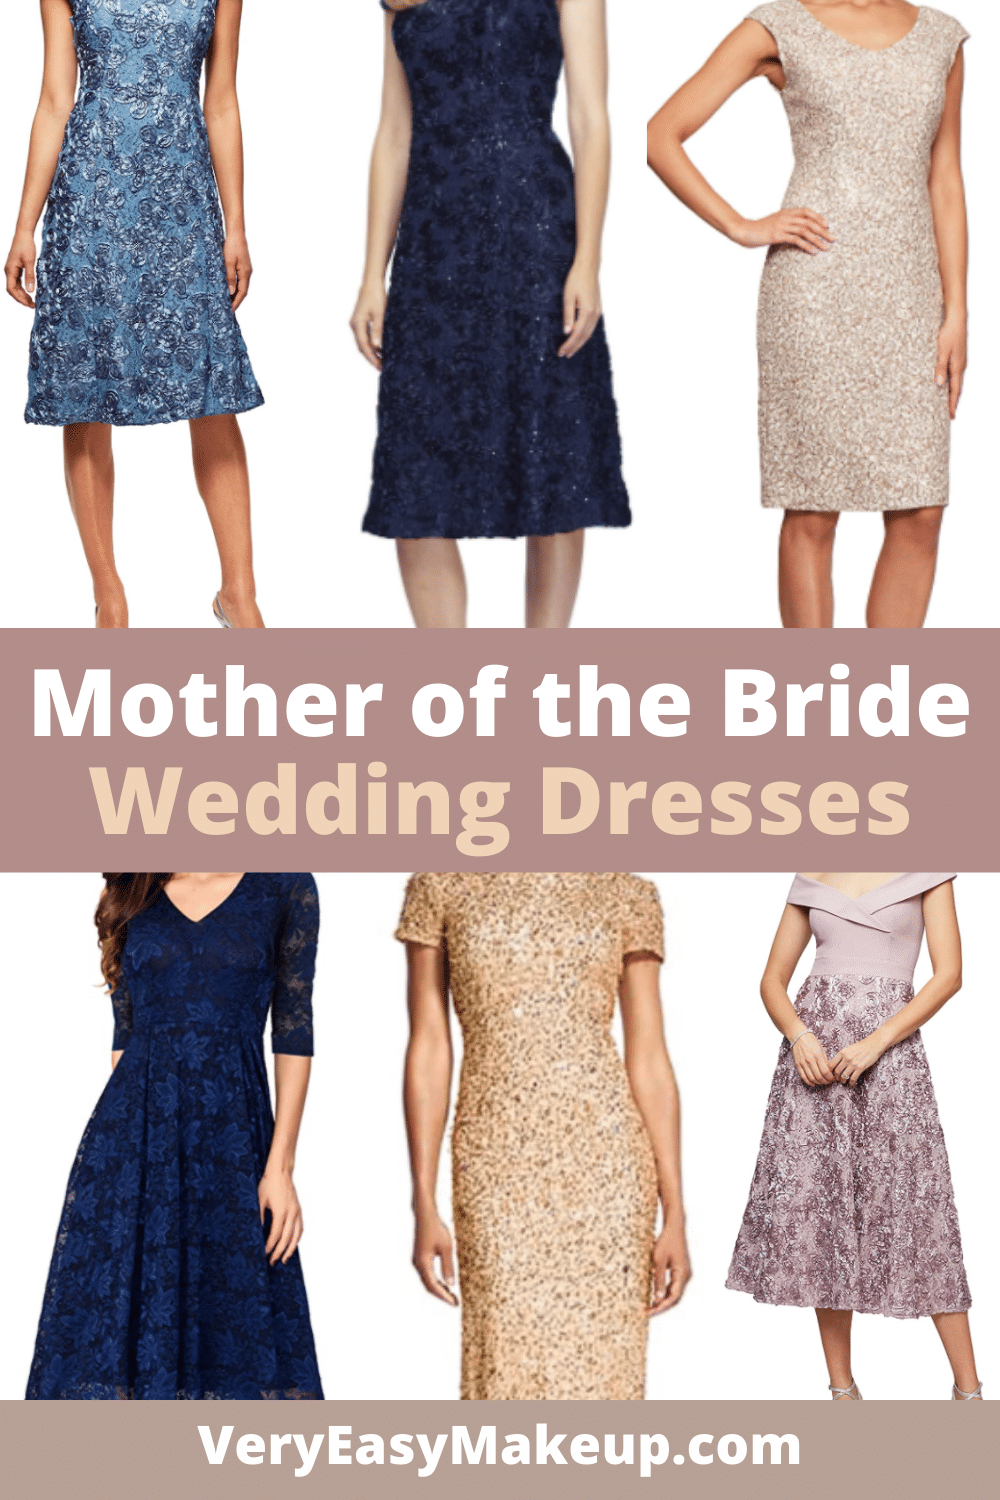 Mother of the Bride Wedding Dresses in Tea Length, Maxi Length, and with Jackets